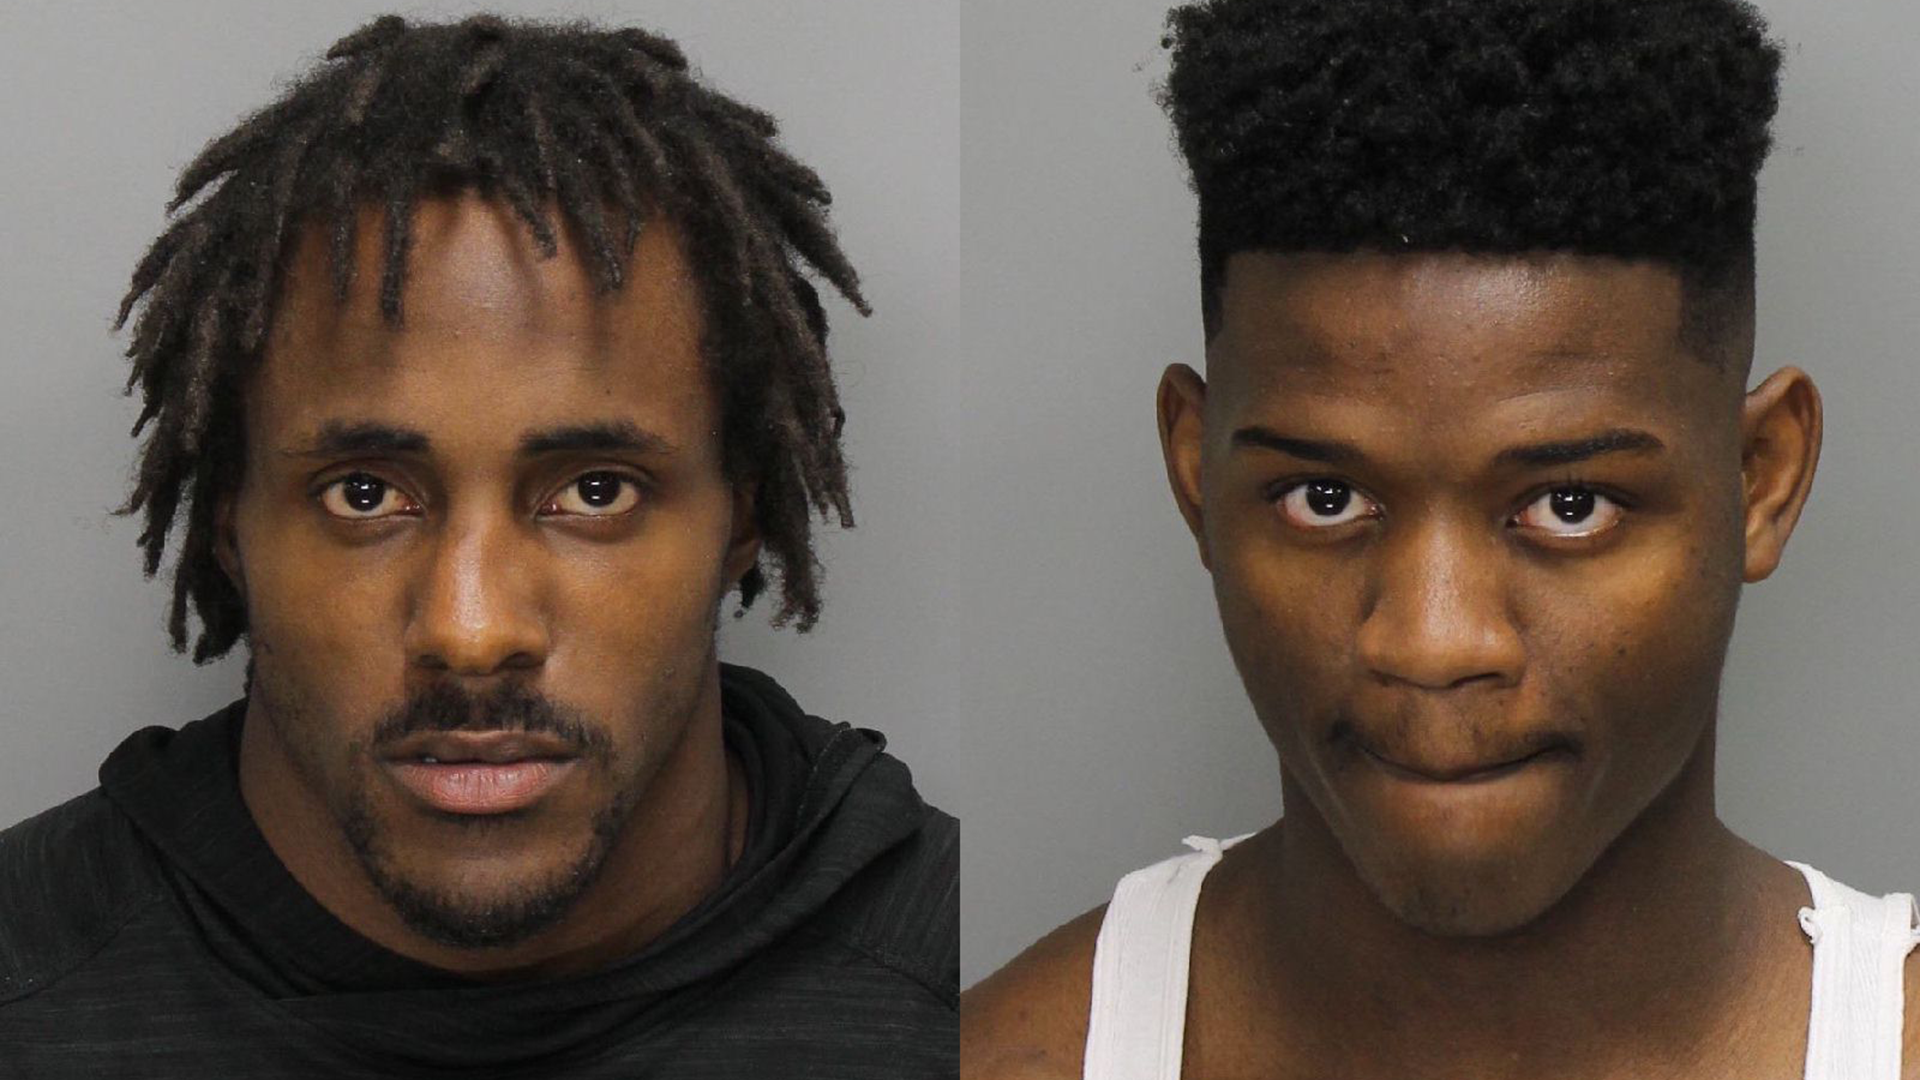 Two of the men were players on the Kennesaw State football team